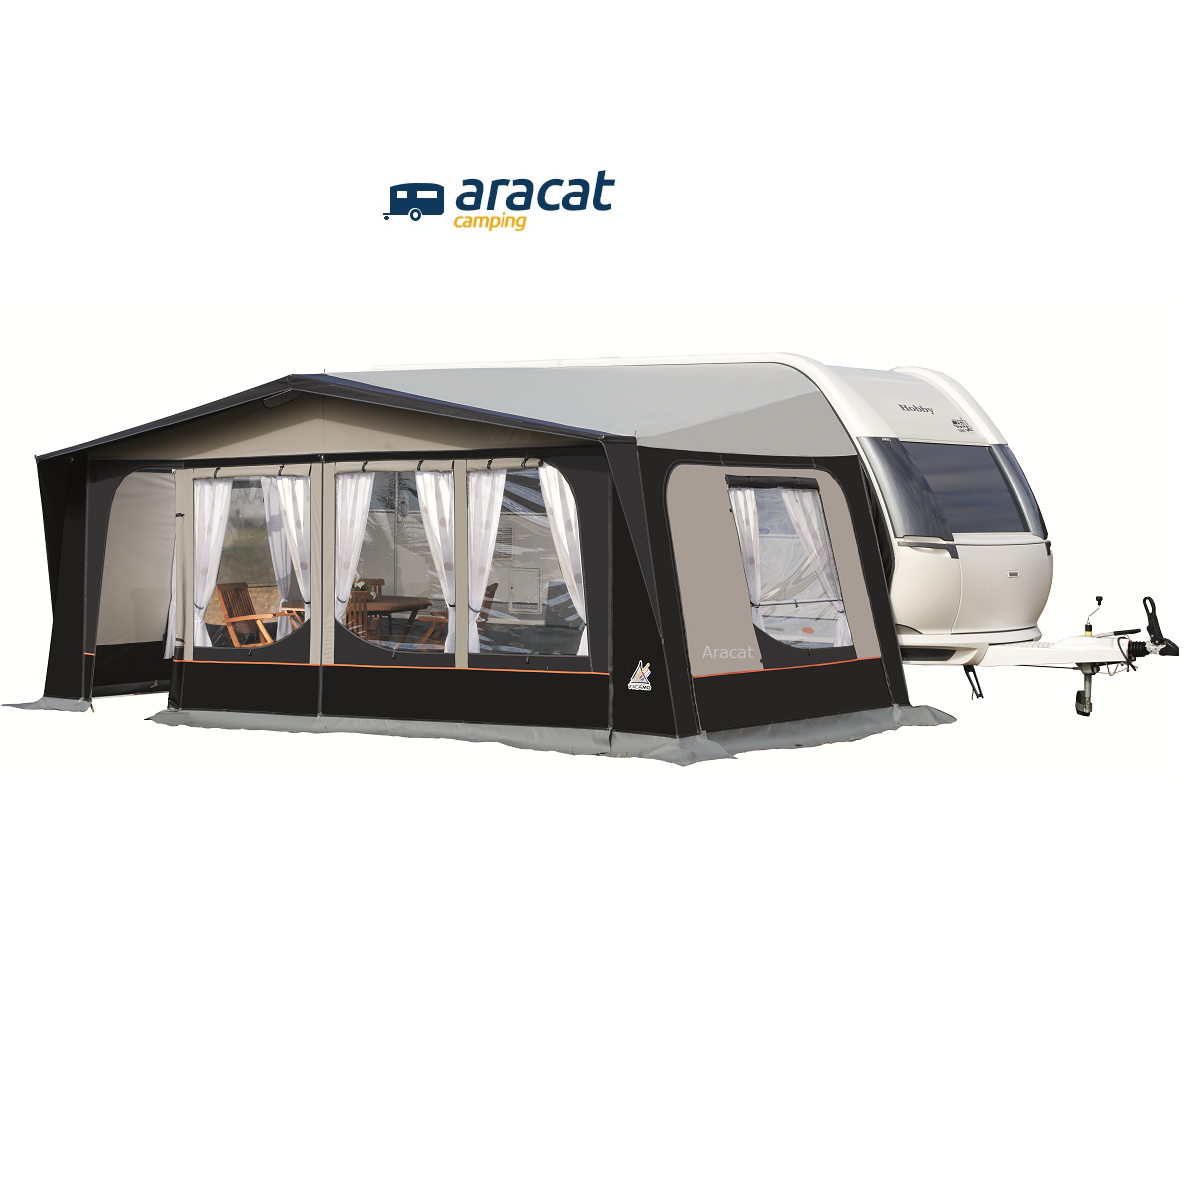 https://www.aracatcamping.com/wp-content/uploads/2019/10/toscana-luxe.png